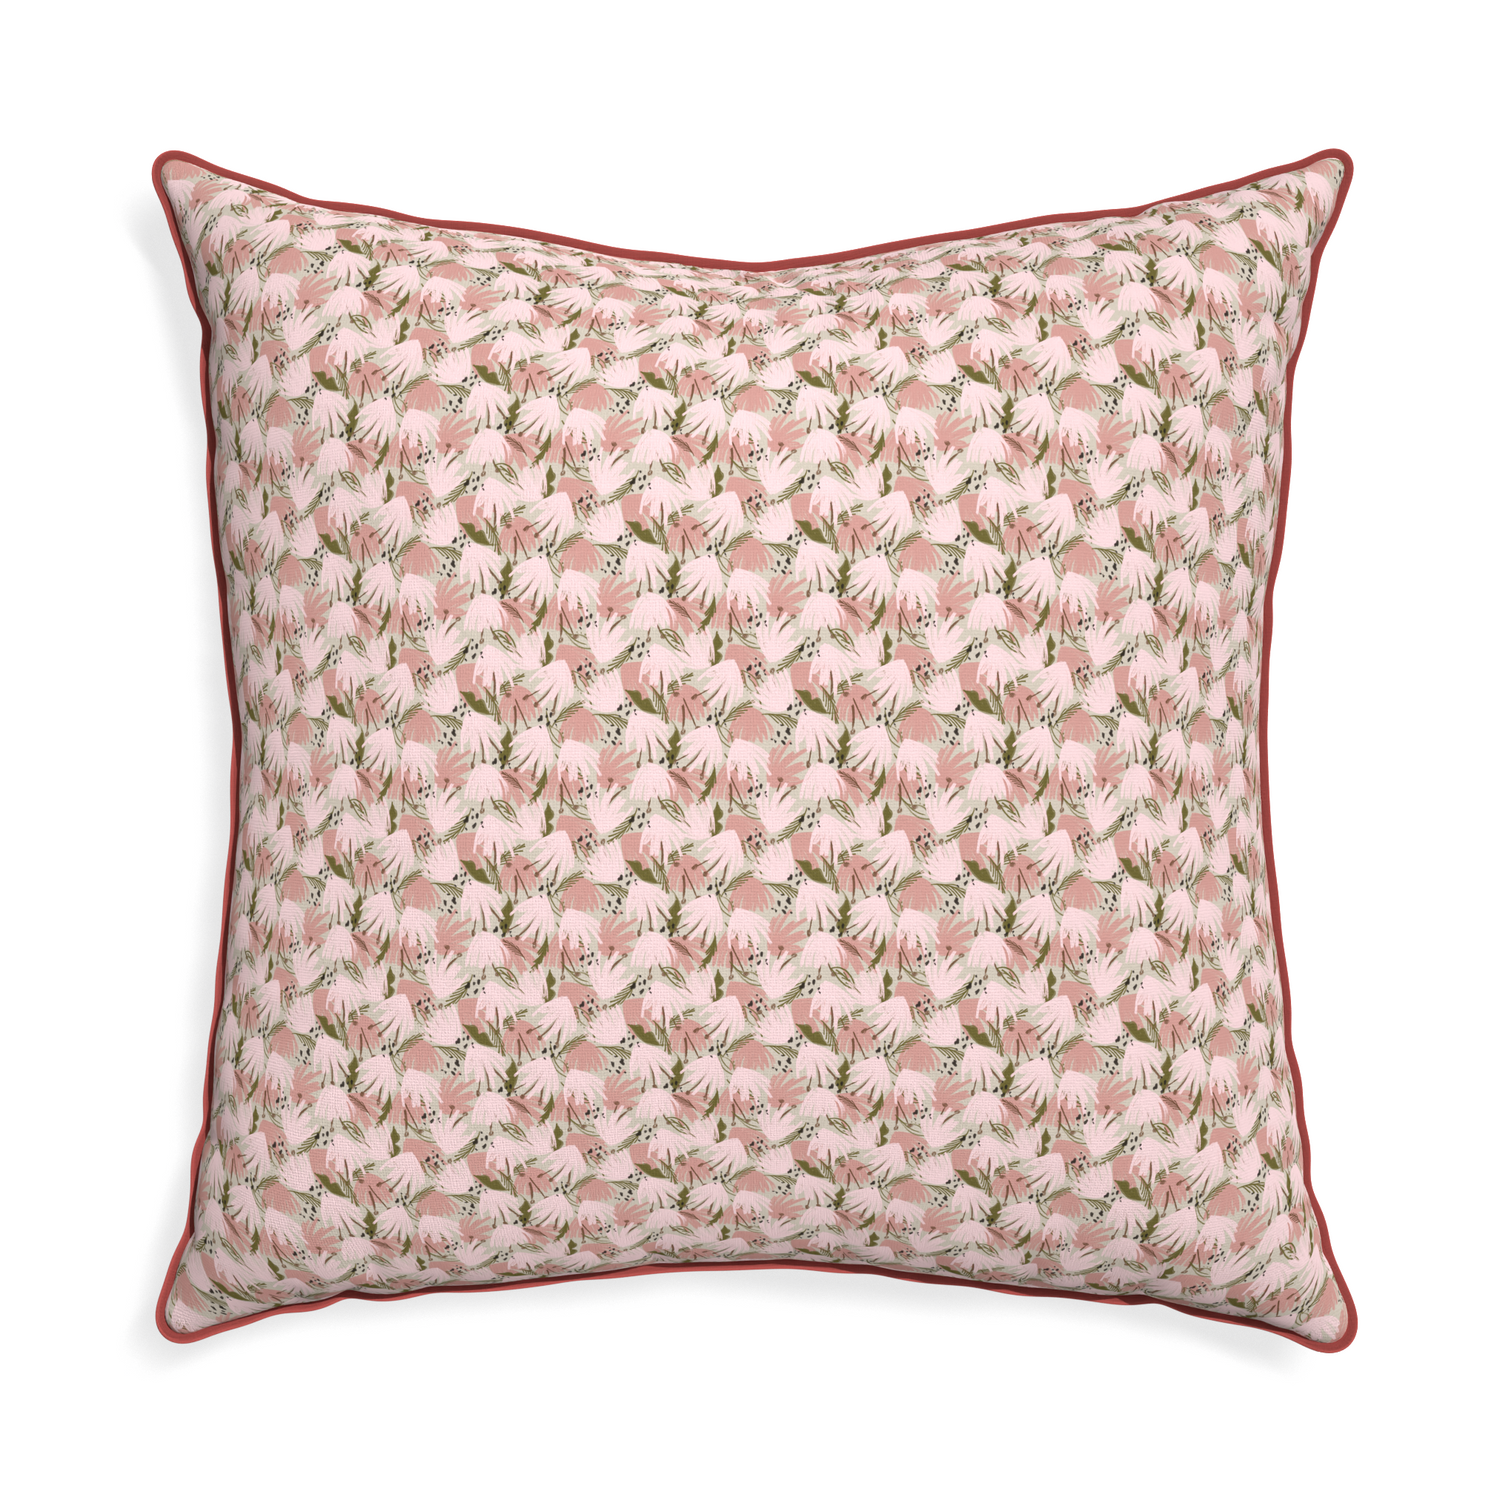 Euro-sham eden pink custom pink floralpillow with c piping on white background